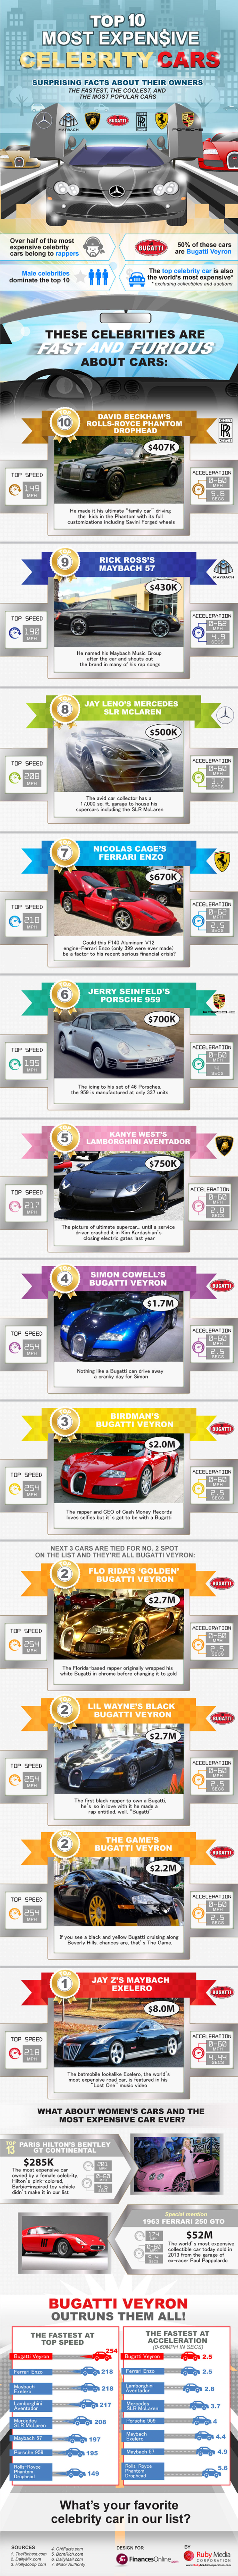 Top 10 Most Expensive Celebrity Cars Infographic